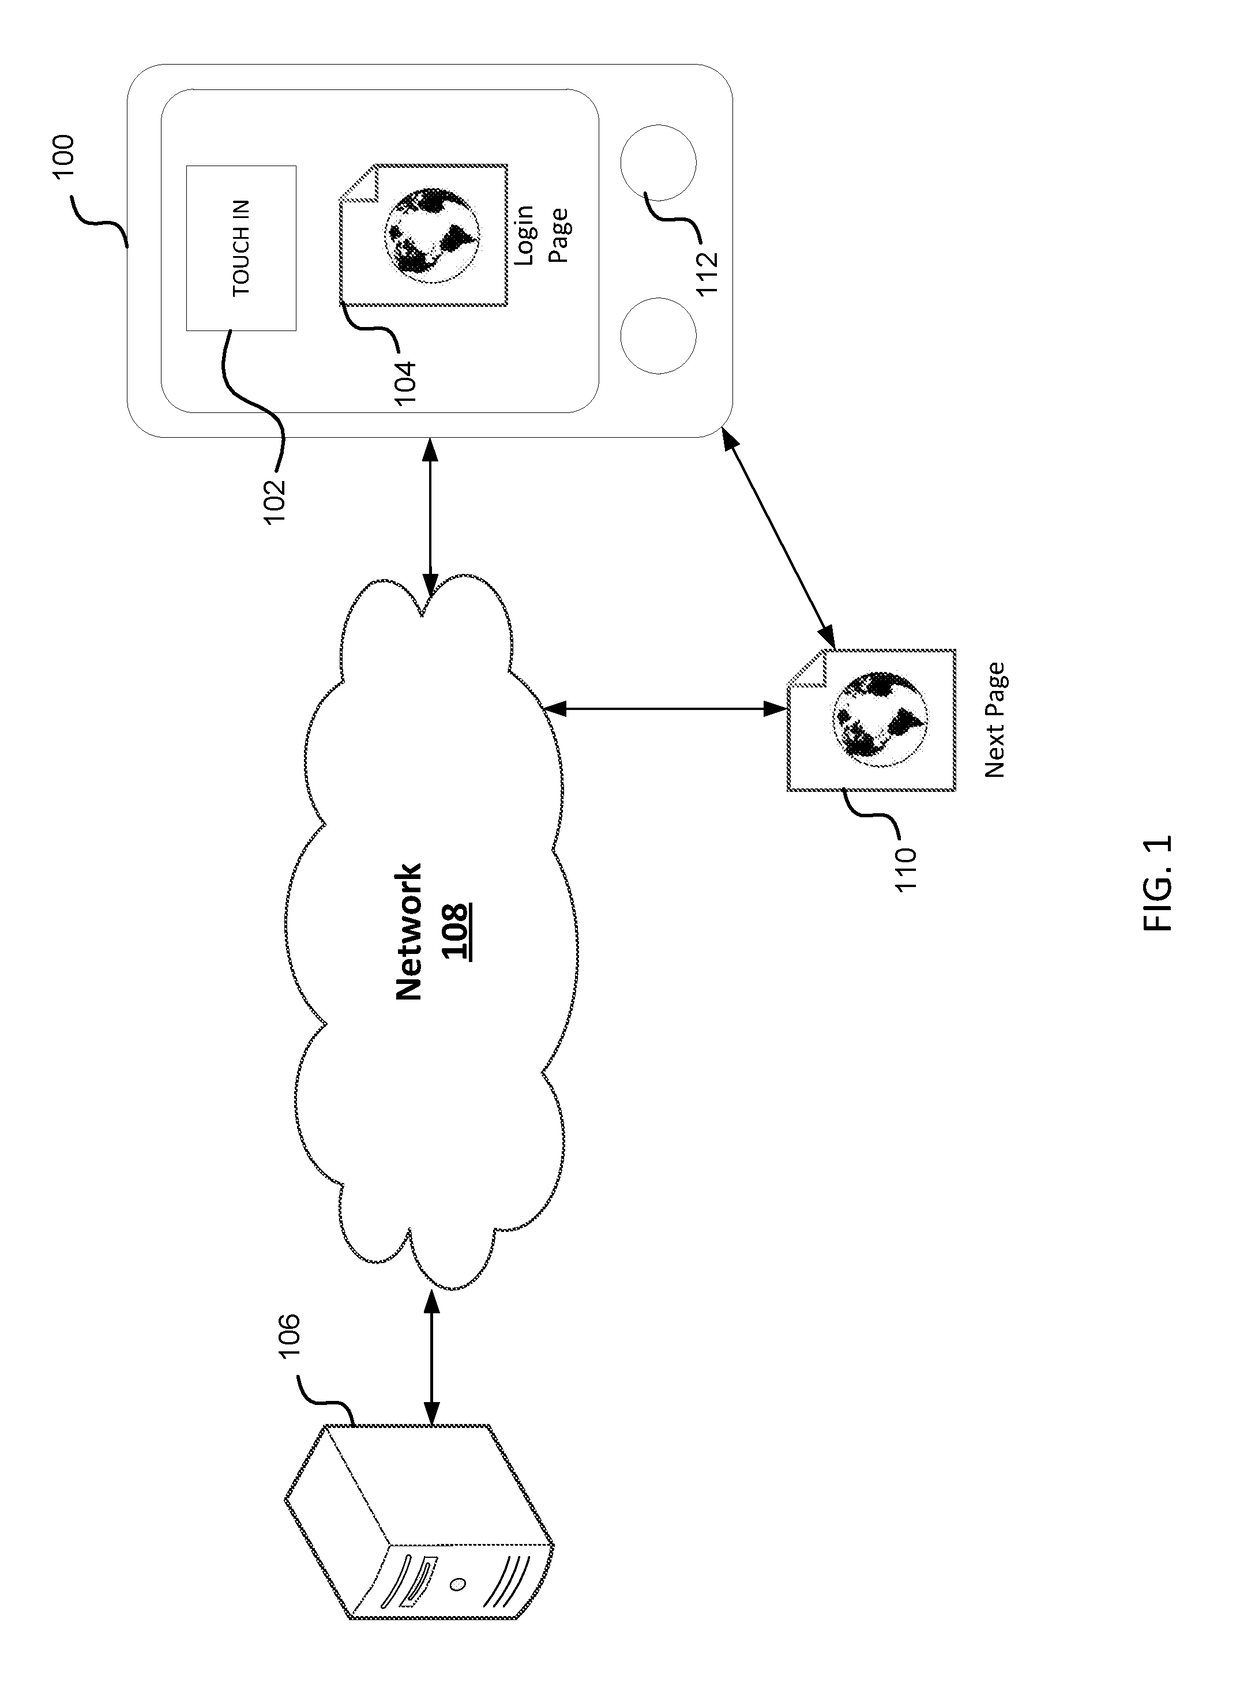 System for validating a biometric input